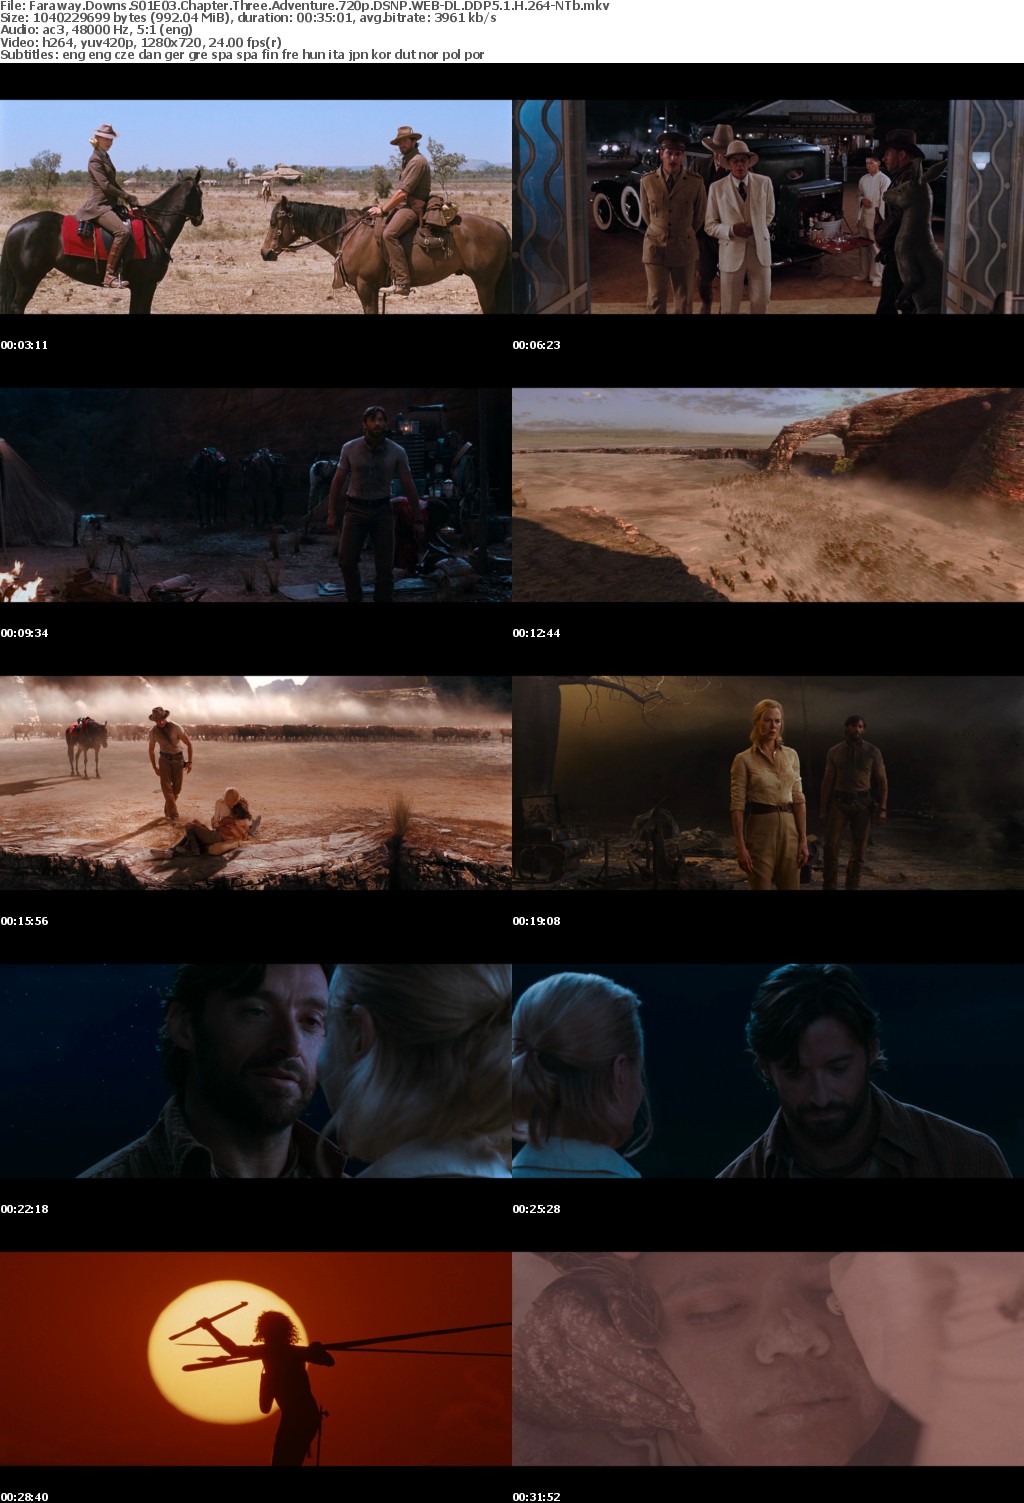 Faraway Downs S01E03 Chapter Three Adventure 720p DSNP WEB-DL DDP5 1 H 264-NTb